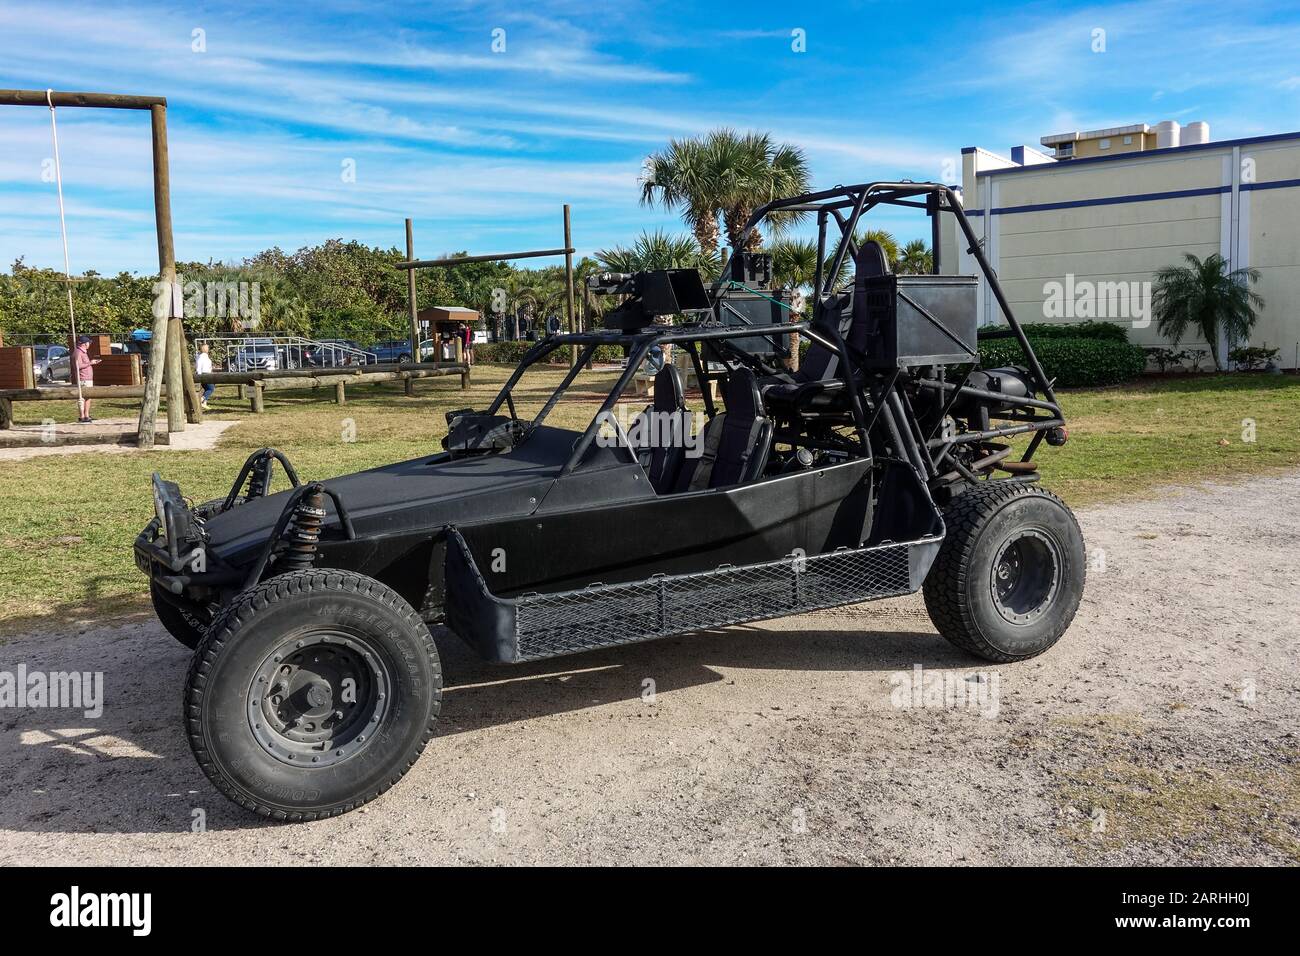 Ft. Pierce,FL/USA-1/27/20: A land Special Operations Assault Vehicle used by Navy SEALs in combat. Stock Photo